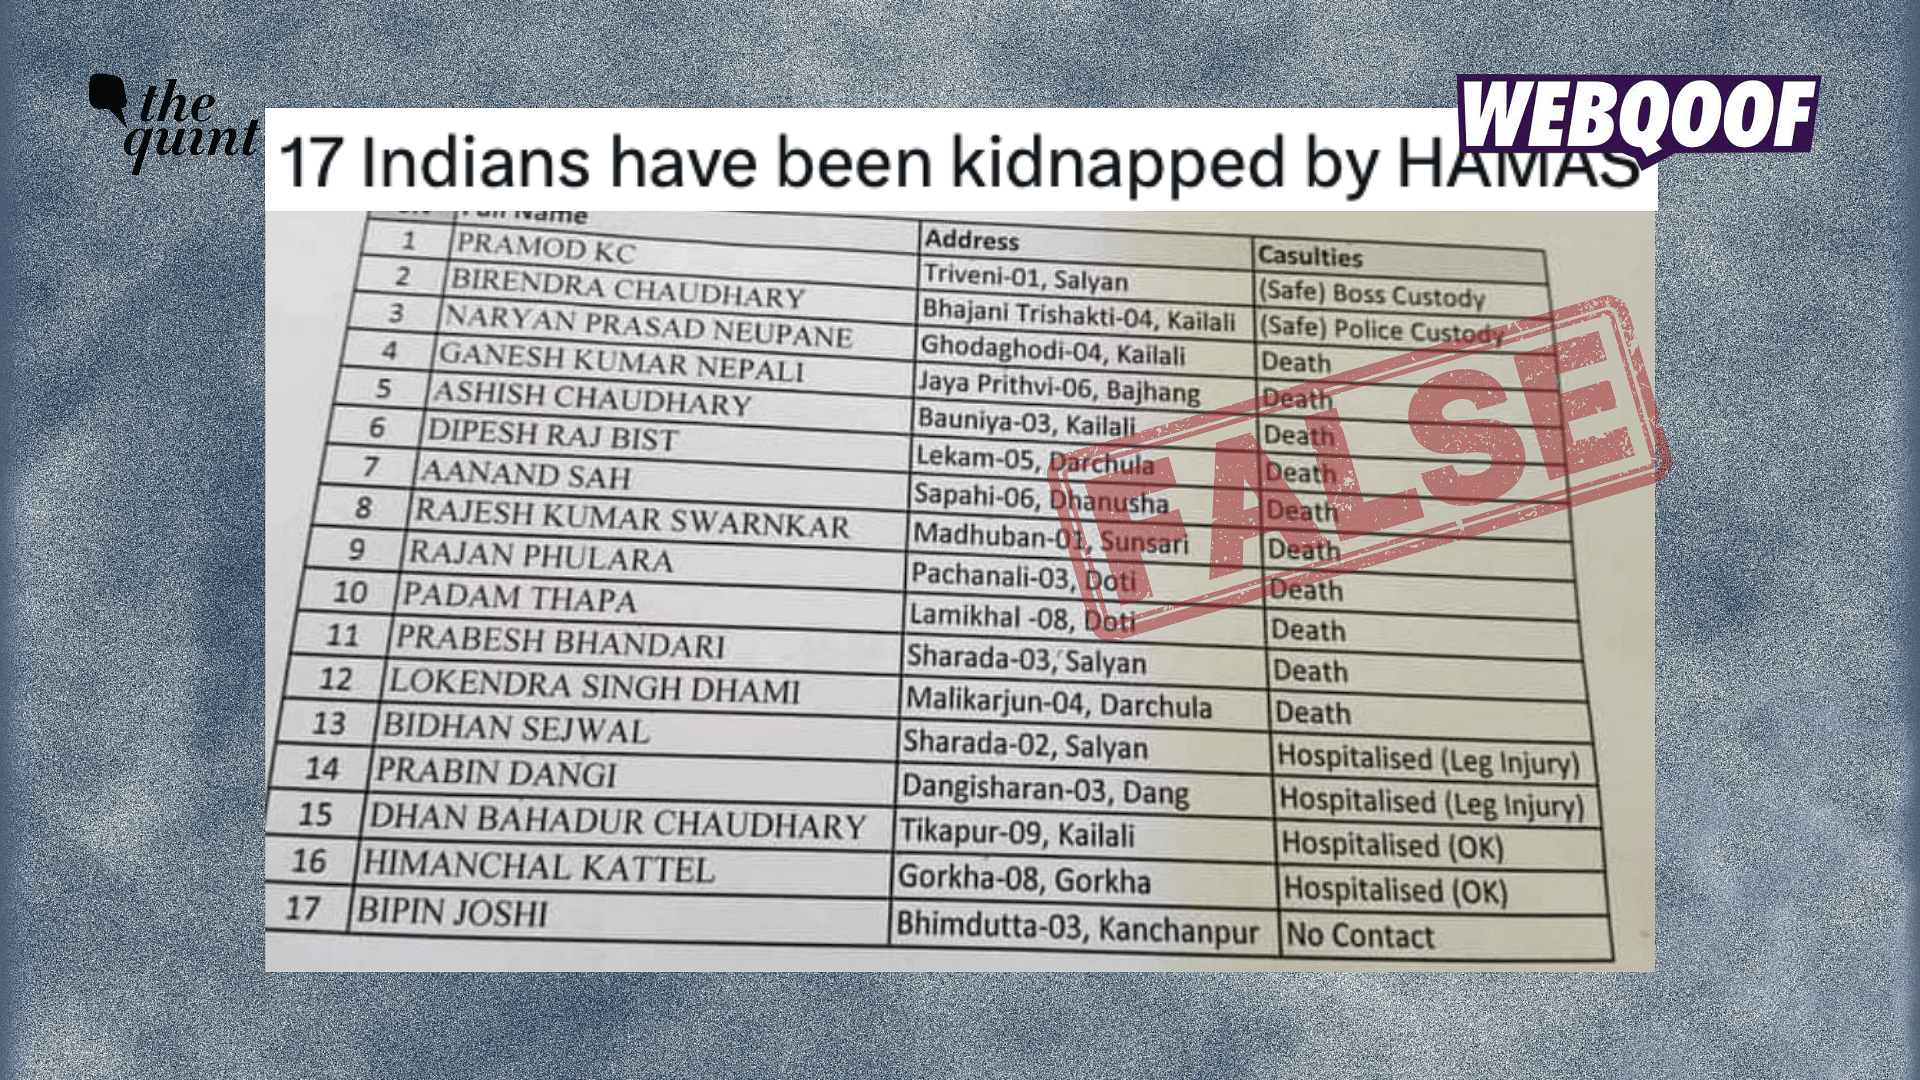 <div class="paragraphs"><p>A photograph showing a list of 17 Nepali nationals is being shared to falsely claim that it shows the names of 17 Indians who were kidnapped by Hamas.</p></div>